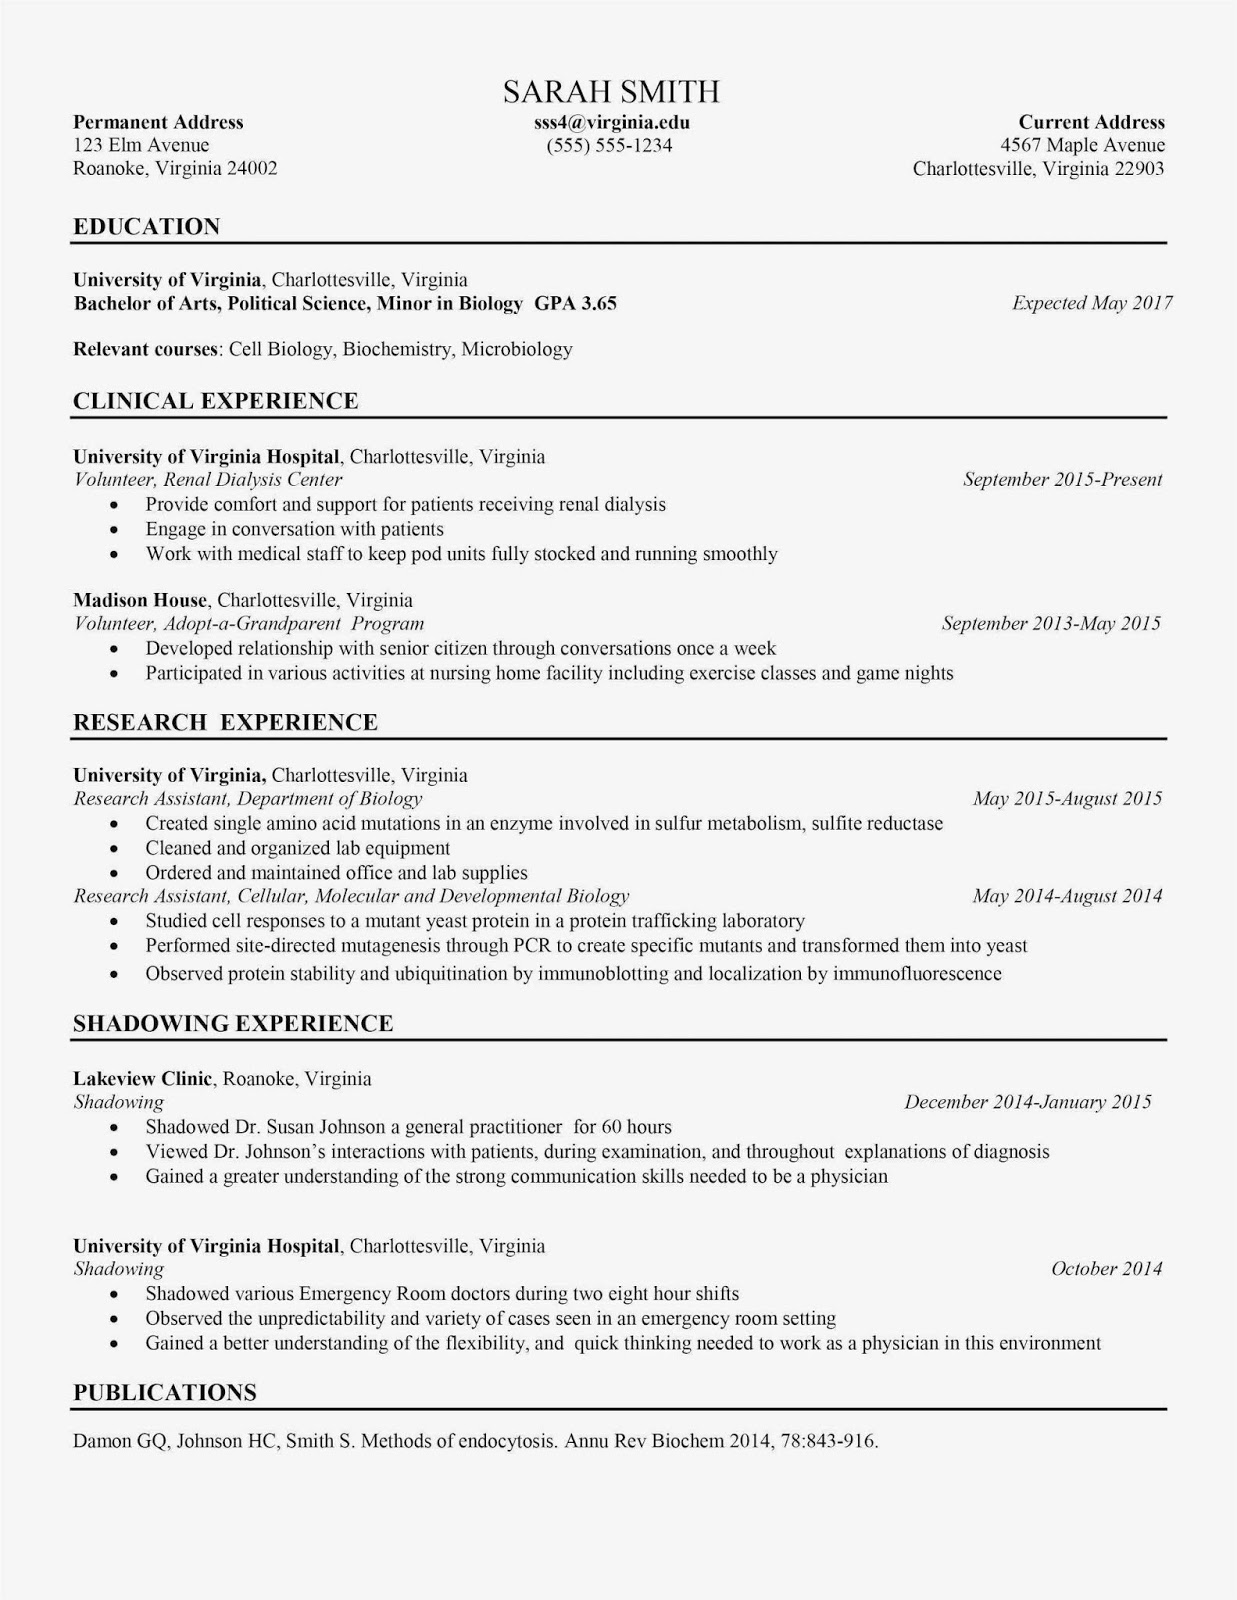 absolutely free resume, absolutely free resume builder, absolutely free resume templates, absolutely free resume template download, absolutely free resume creator, absolutely free resume downloads, absolutely free resume formats absolutely free resume maker absolutely free printable resume templates absolutely free resume writer download best absolutely